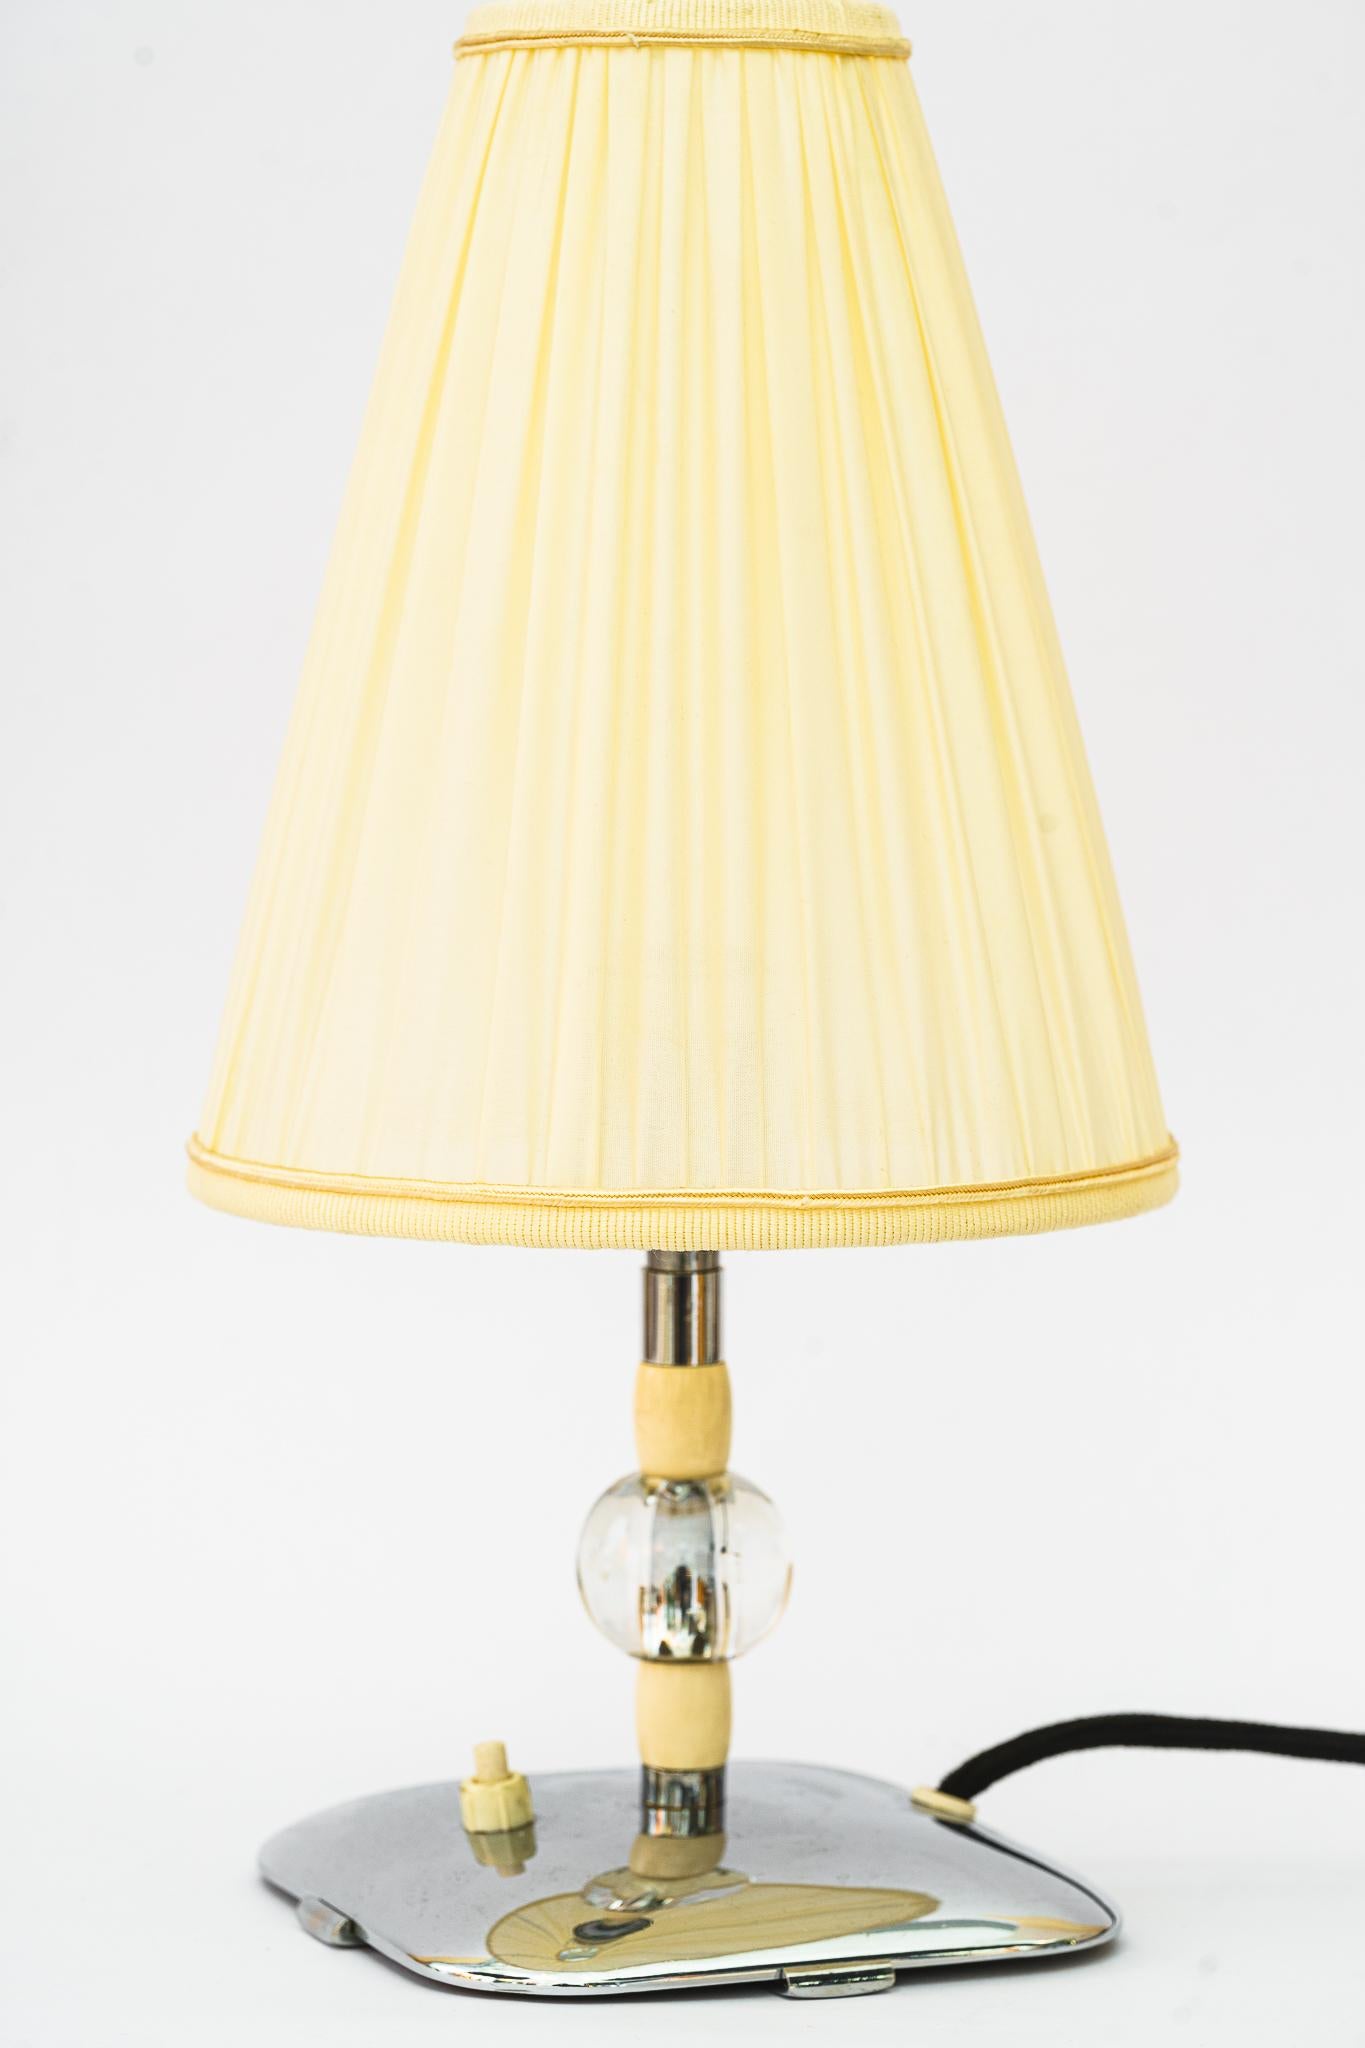 Art Deco table lamp vienna around 1920s
Original condition
Only the shade is replaced.